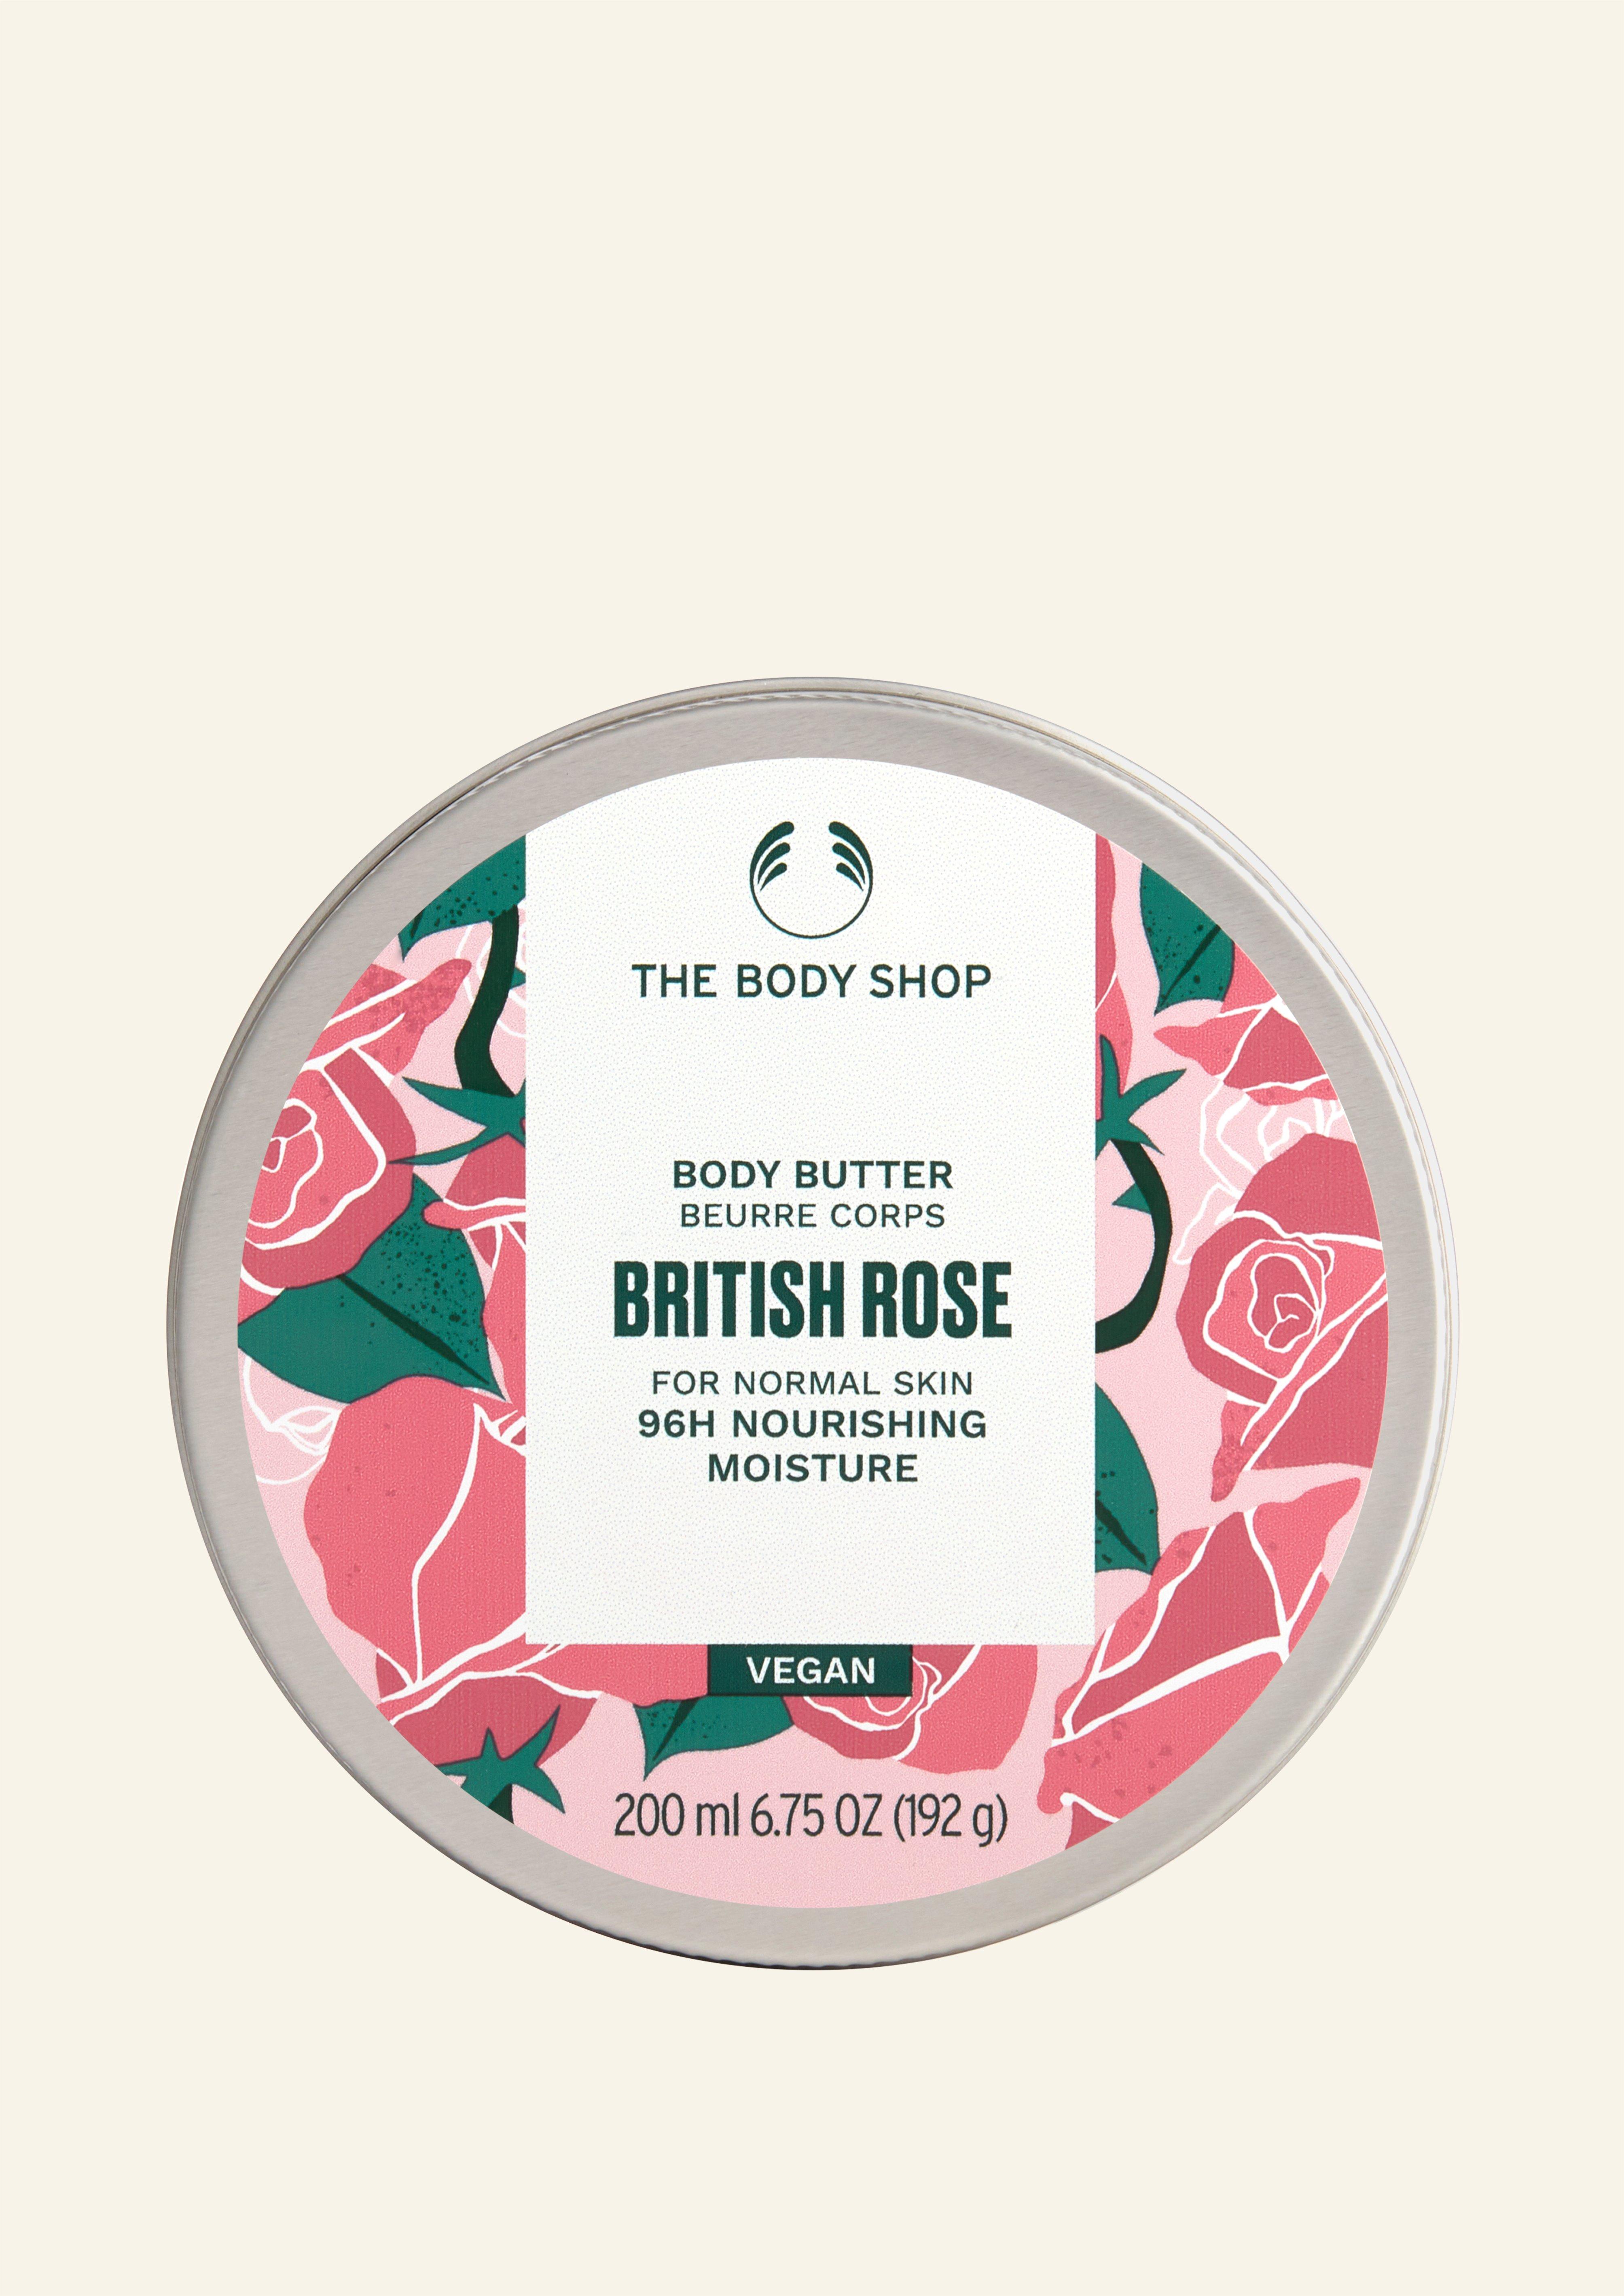 English Rose Body Butter - Bath & Body Gifting from I Love